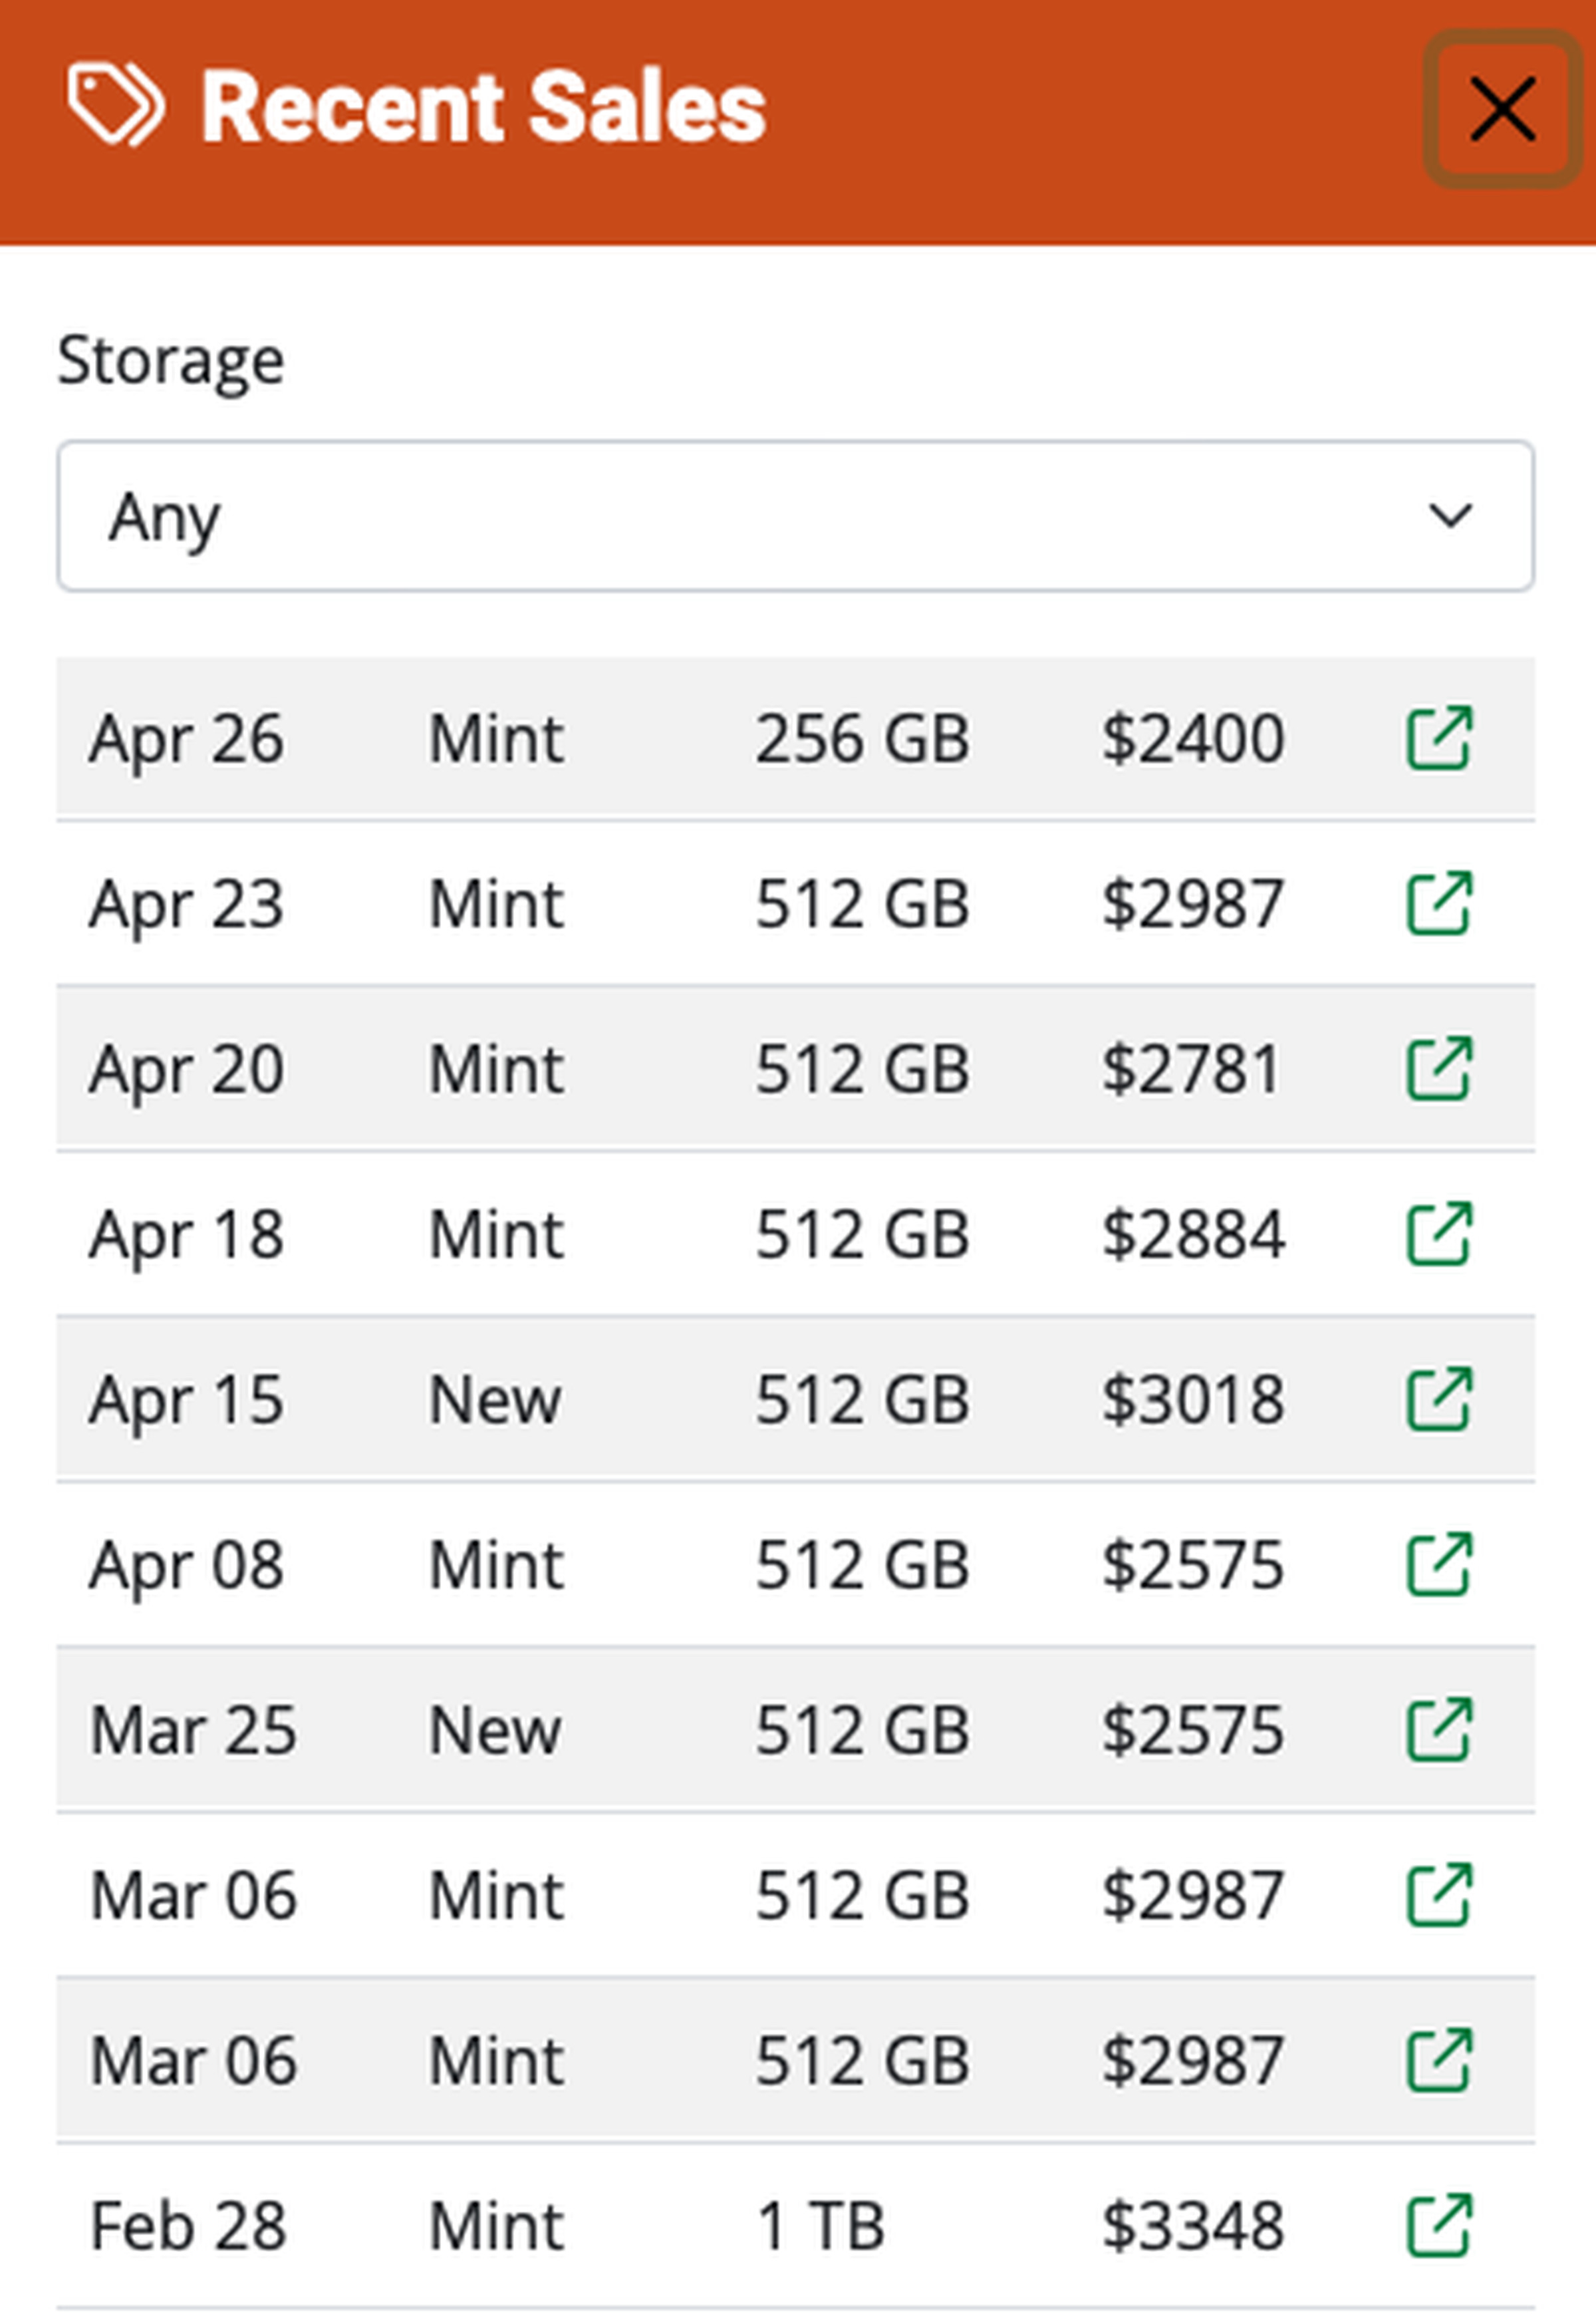 A screenshot of recent Vision Pro sale prices on Swappa. Prices range from $2400 for a 256GB model to $3348 for a 1TB one.